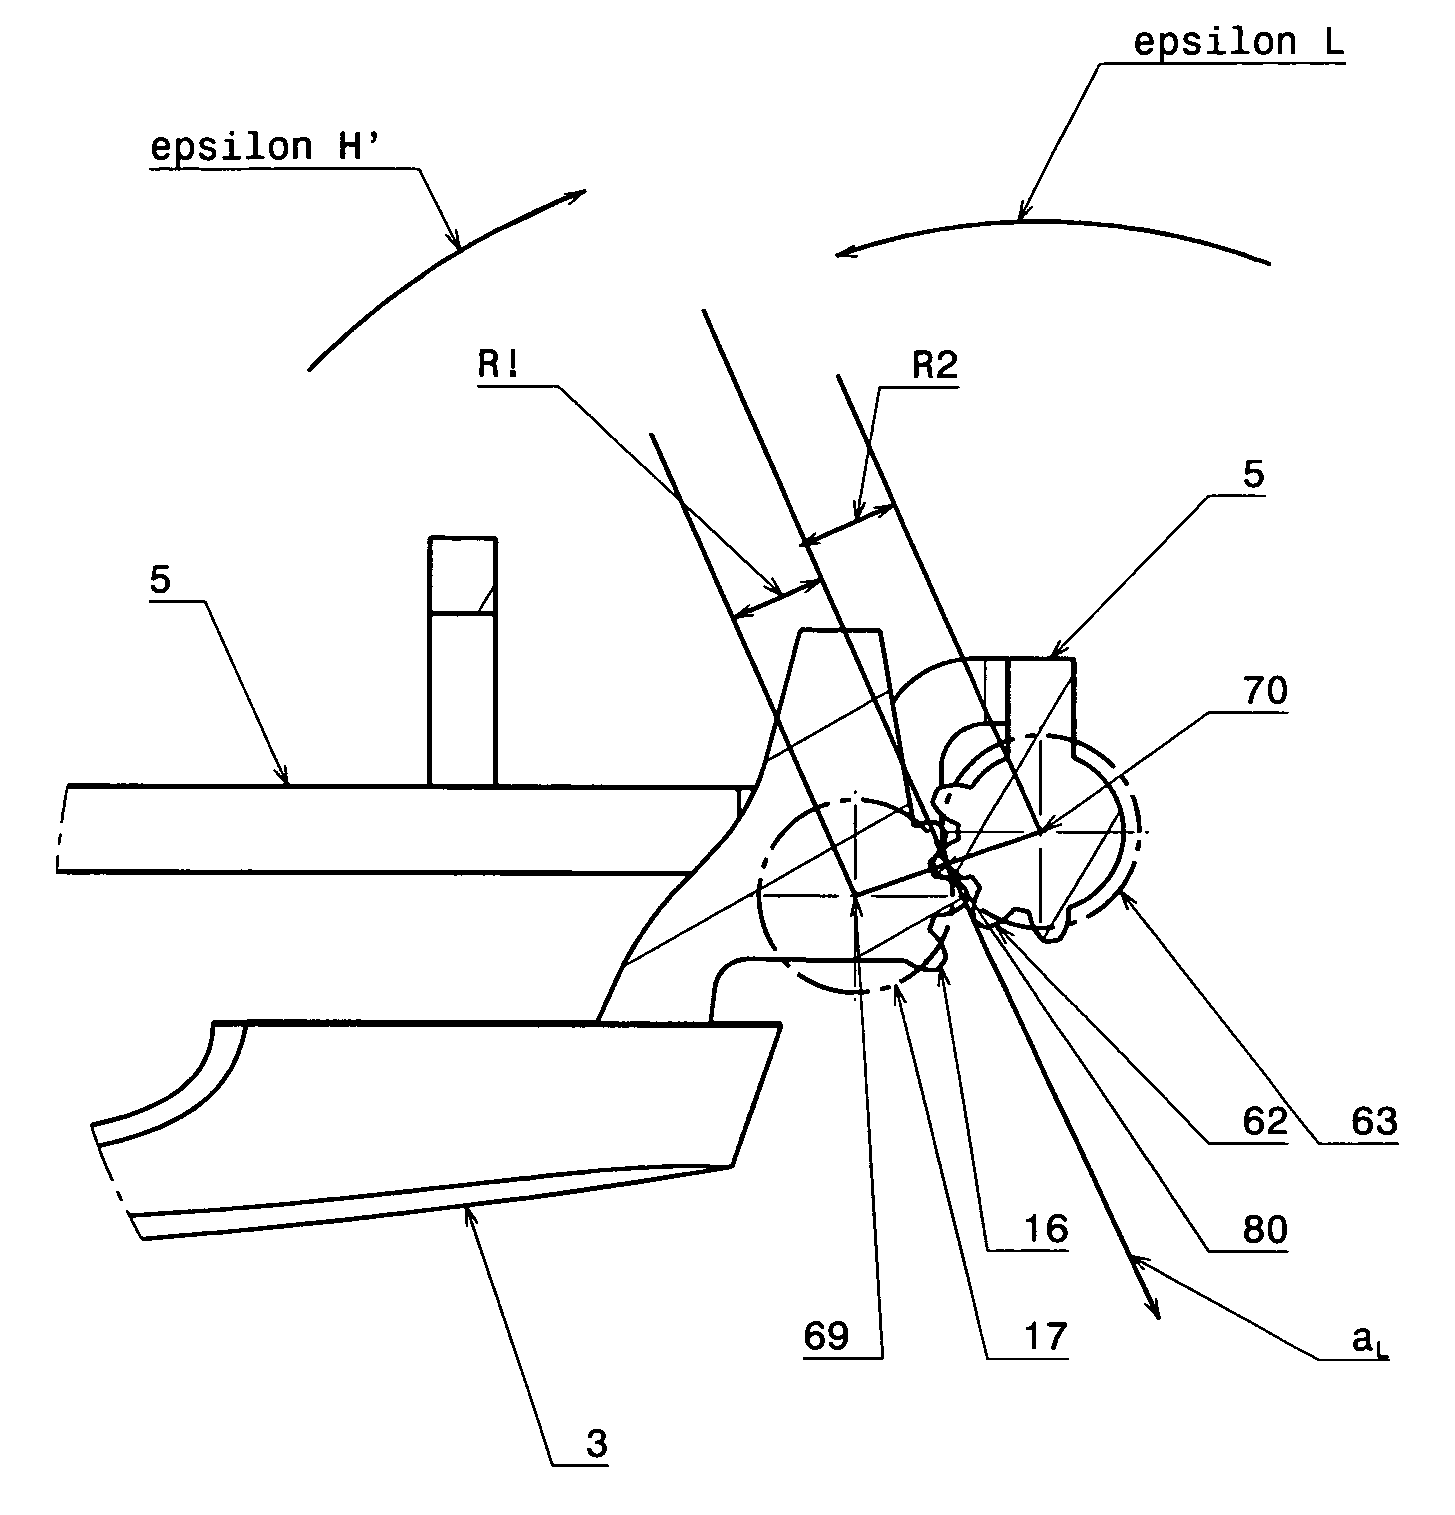 Automotive door handle assembly with directly coupled-inertia activated mechanism